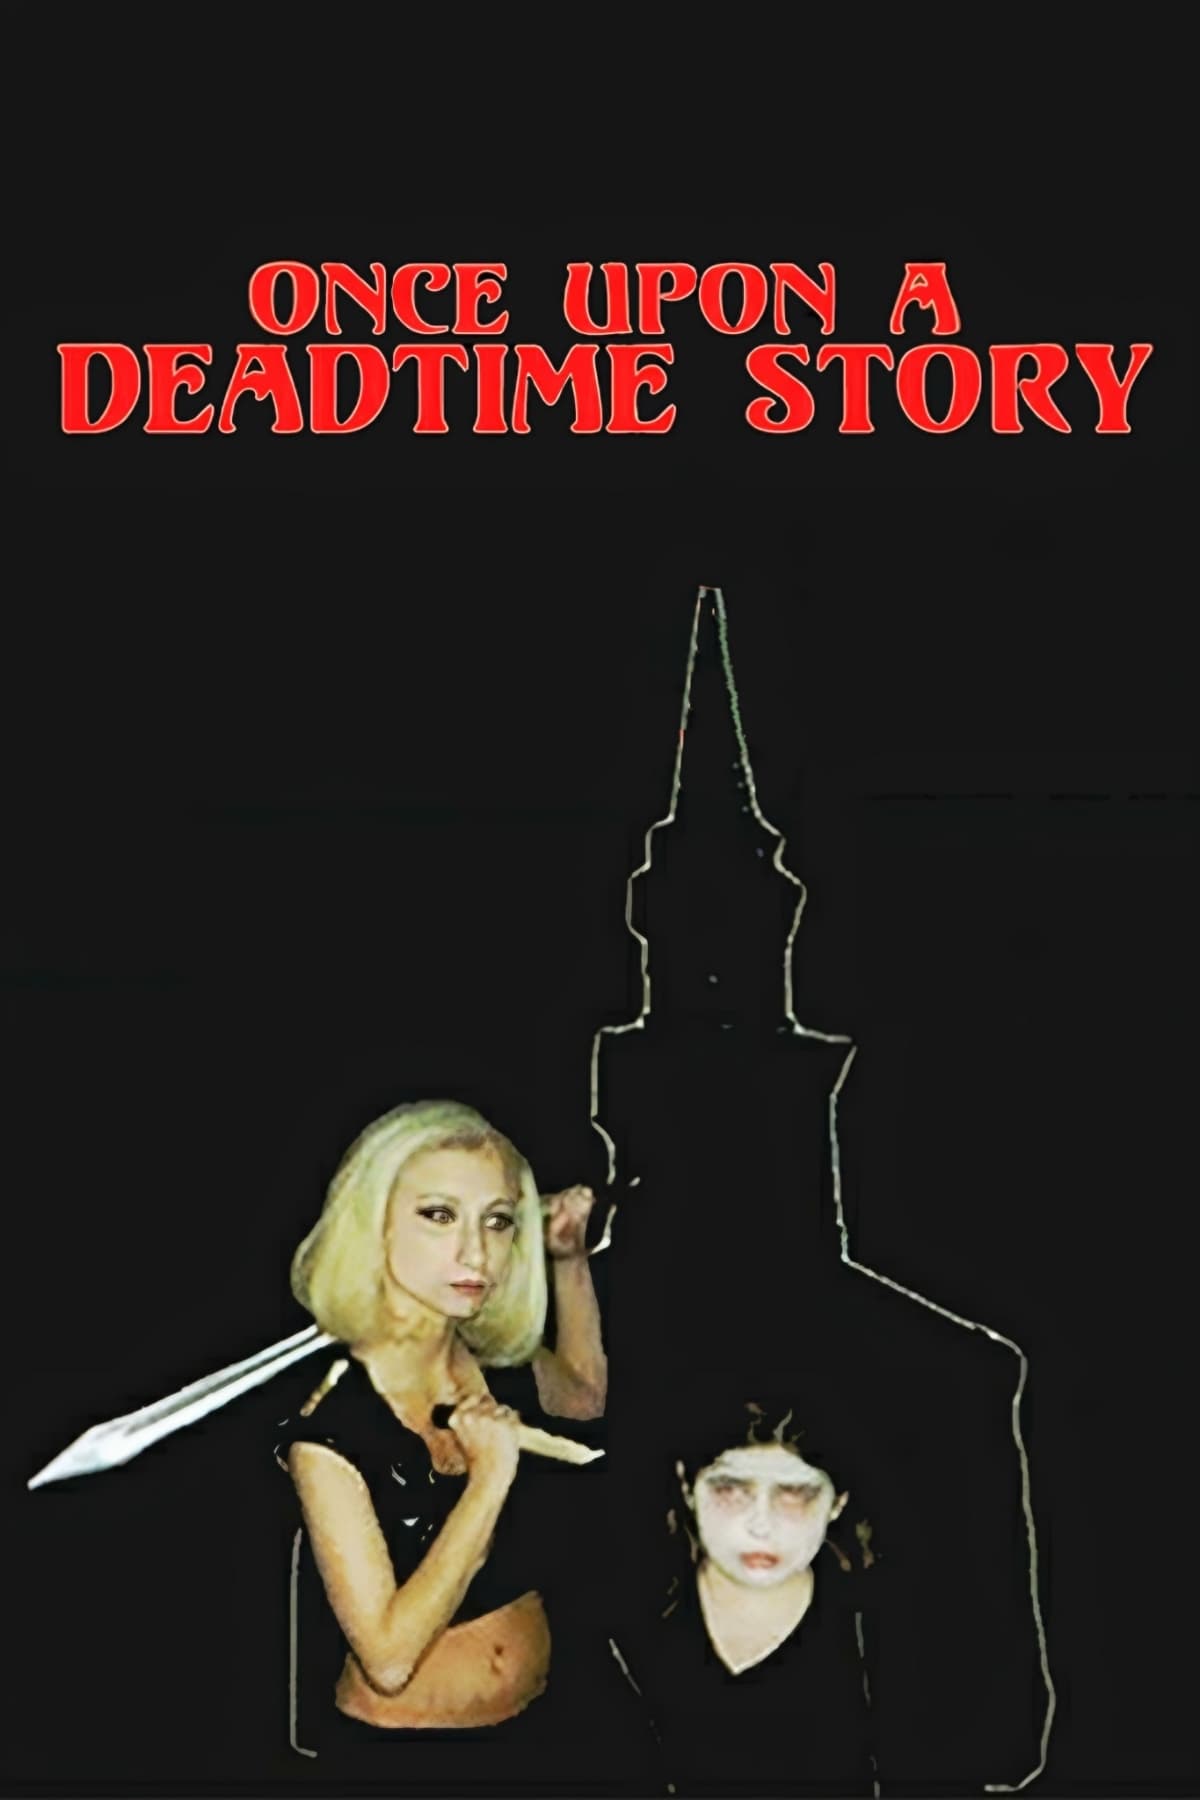 Once Upon a Deadtime Story